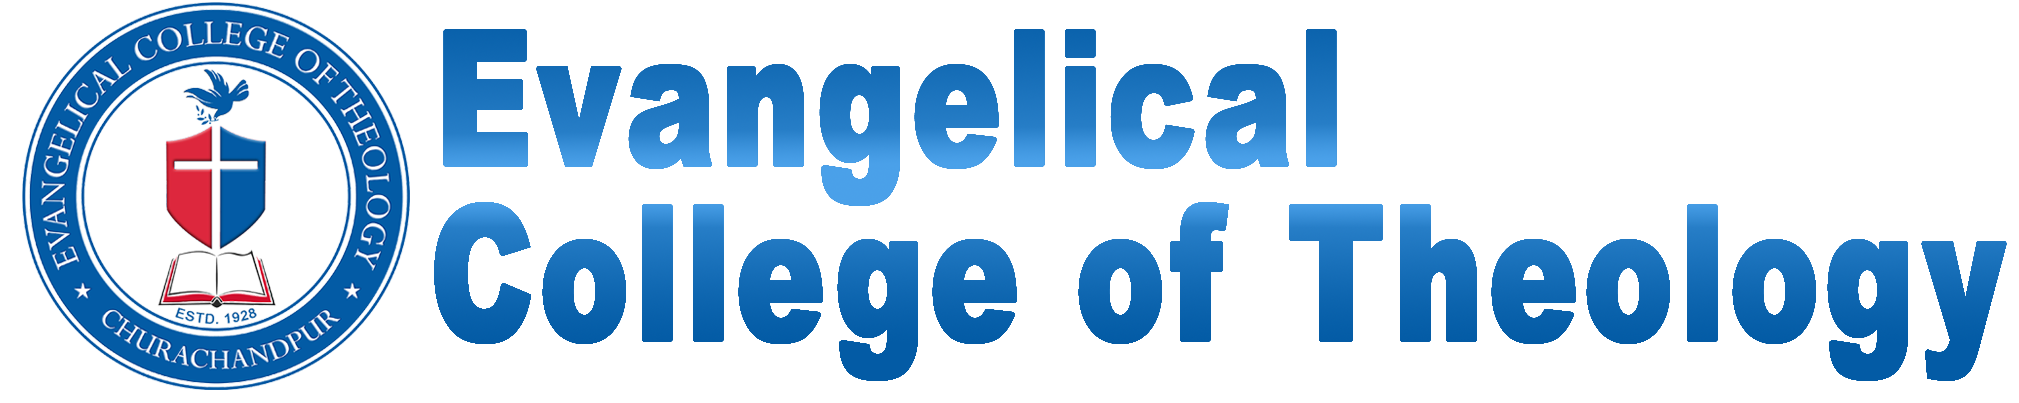 Evangelical College of Theology